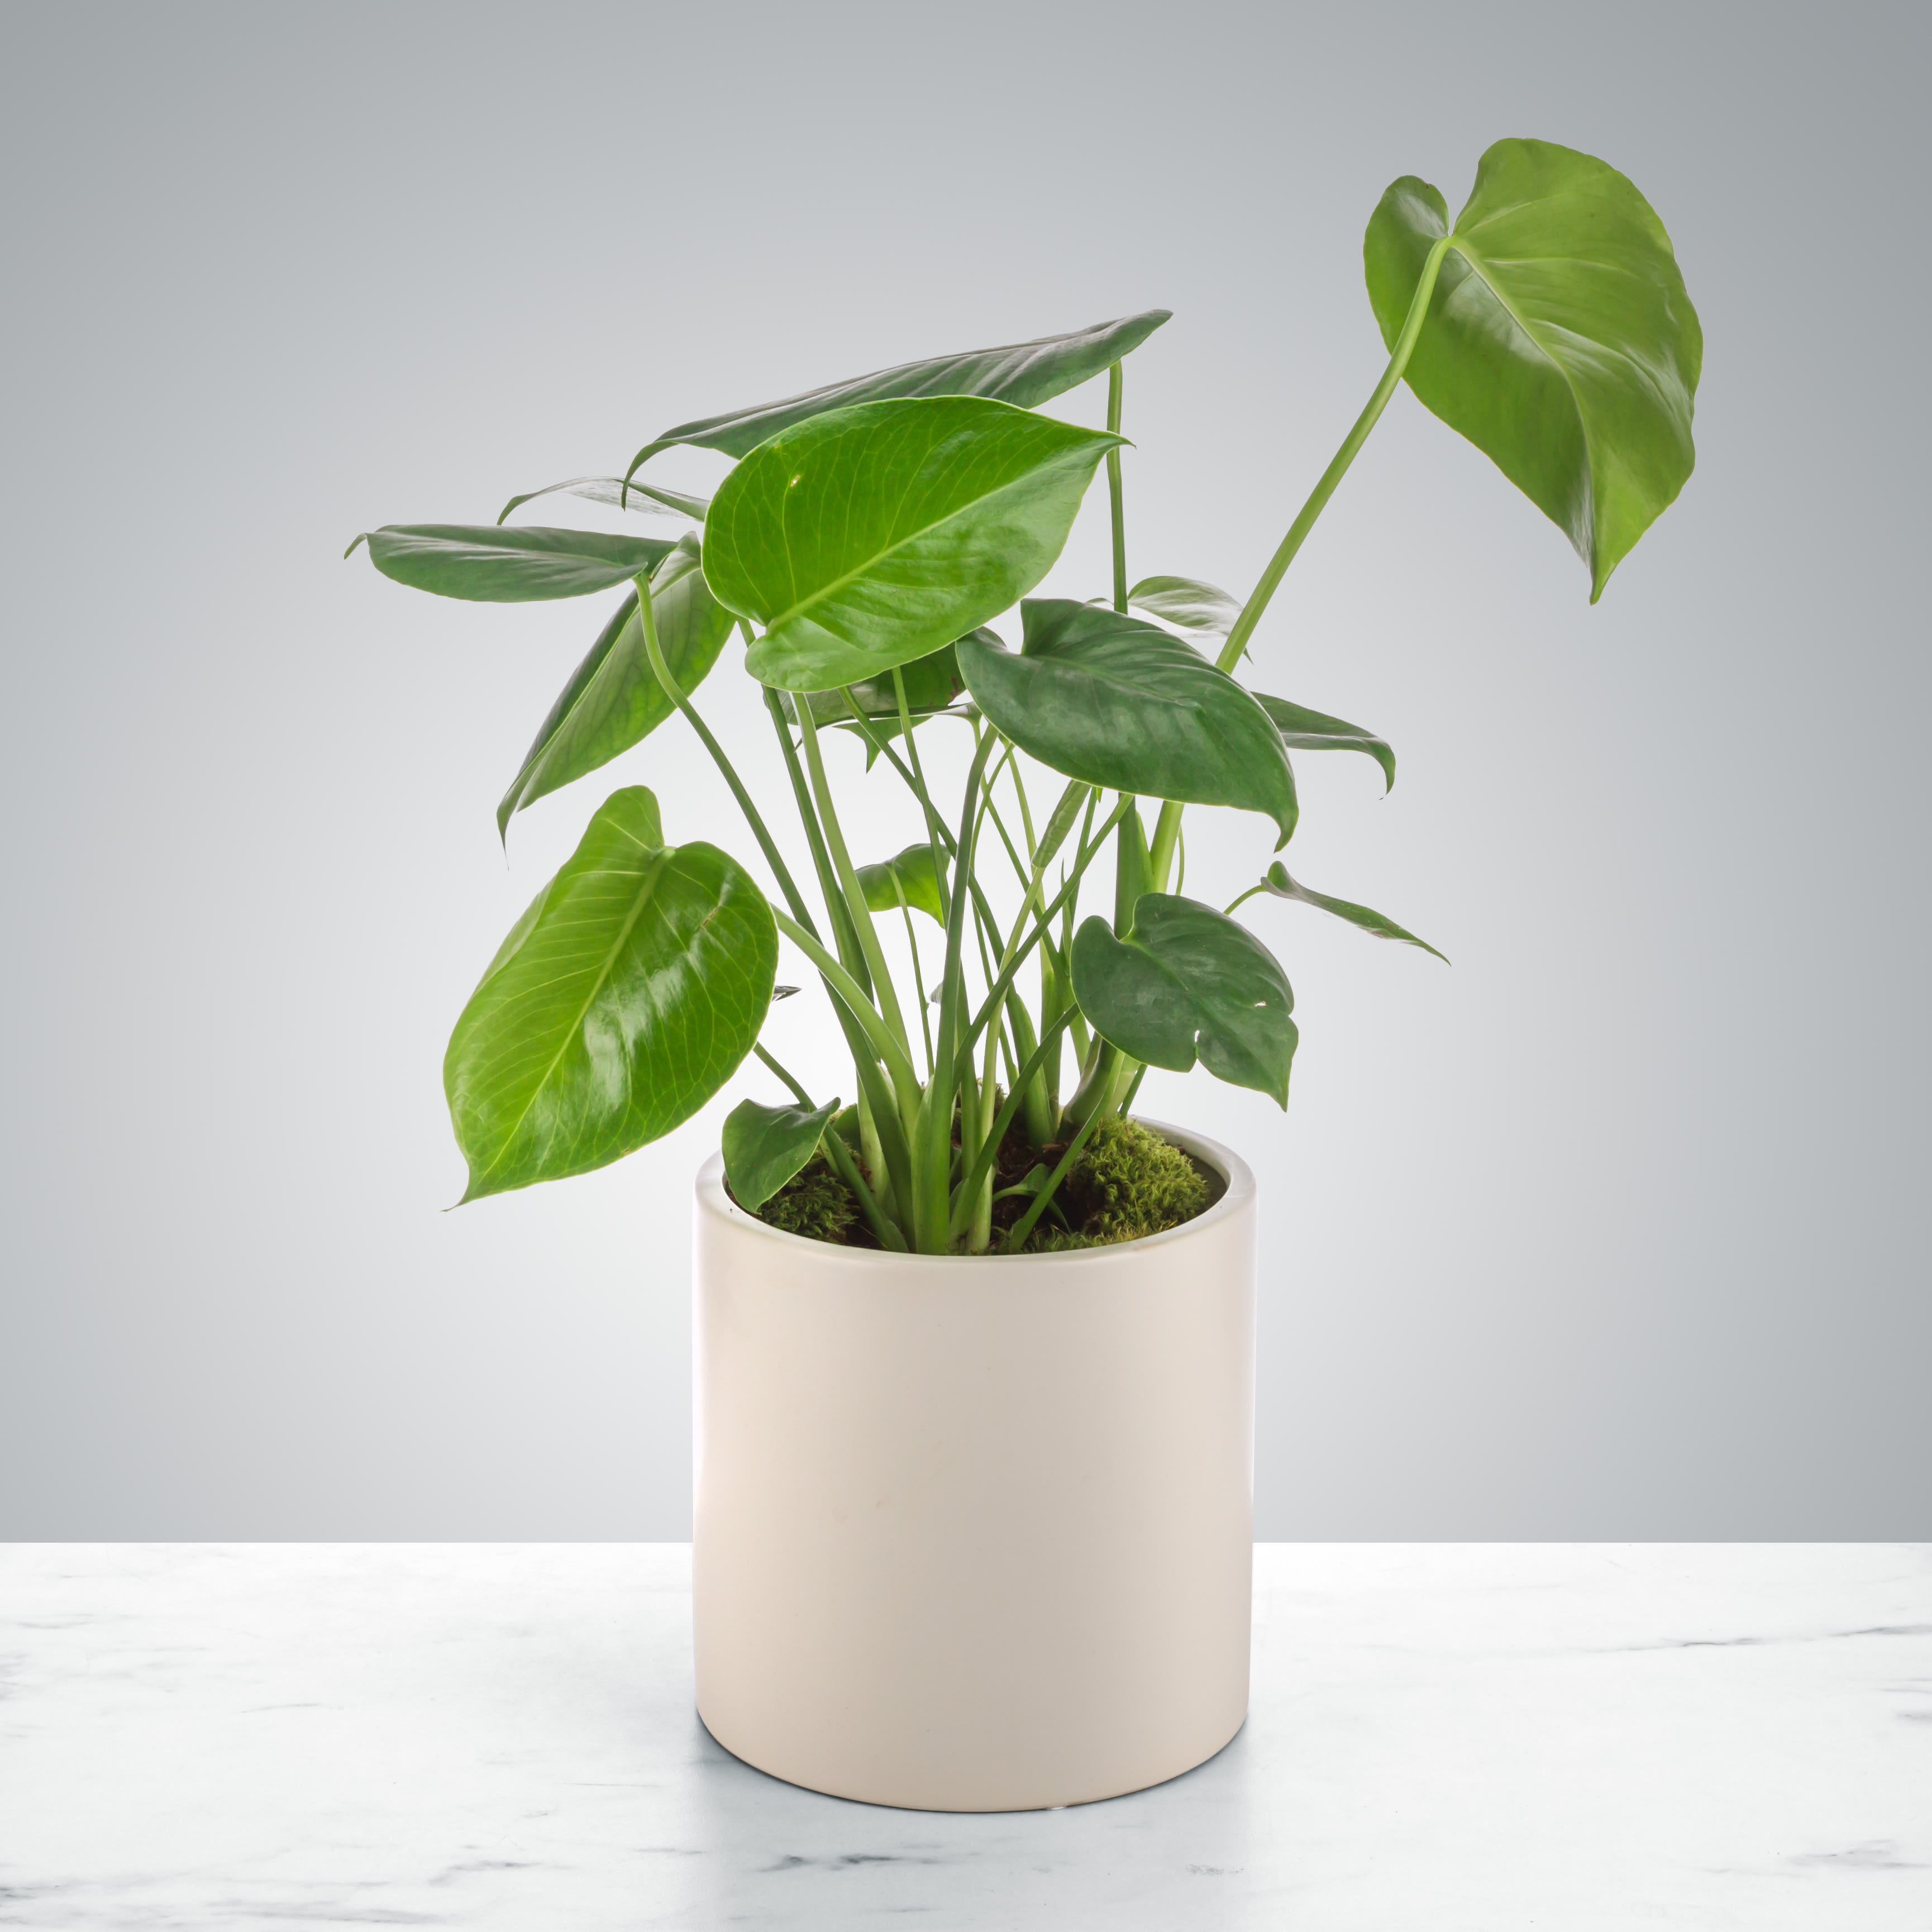 Monstera Plant - The Monstera is a classic house plant that likes bright to medium indirect light. Send it to your trendiest friend to make their space blog-worthy.